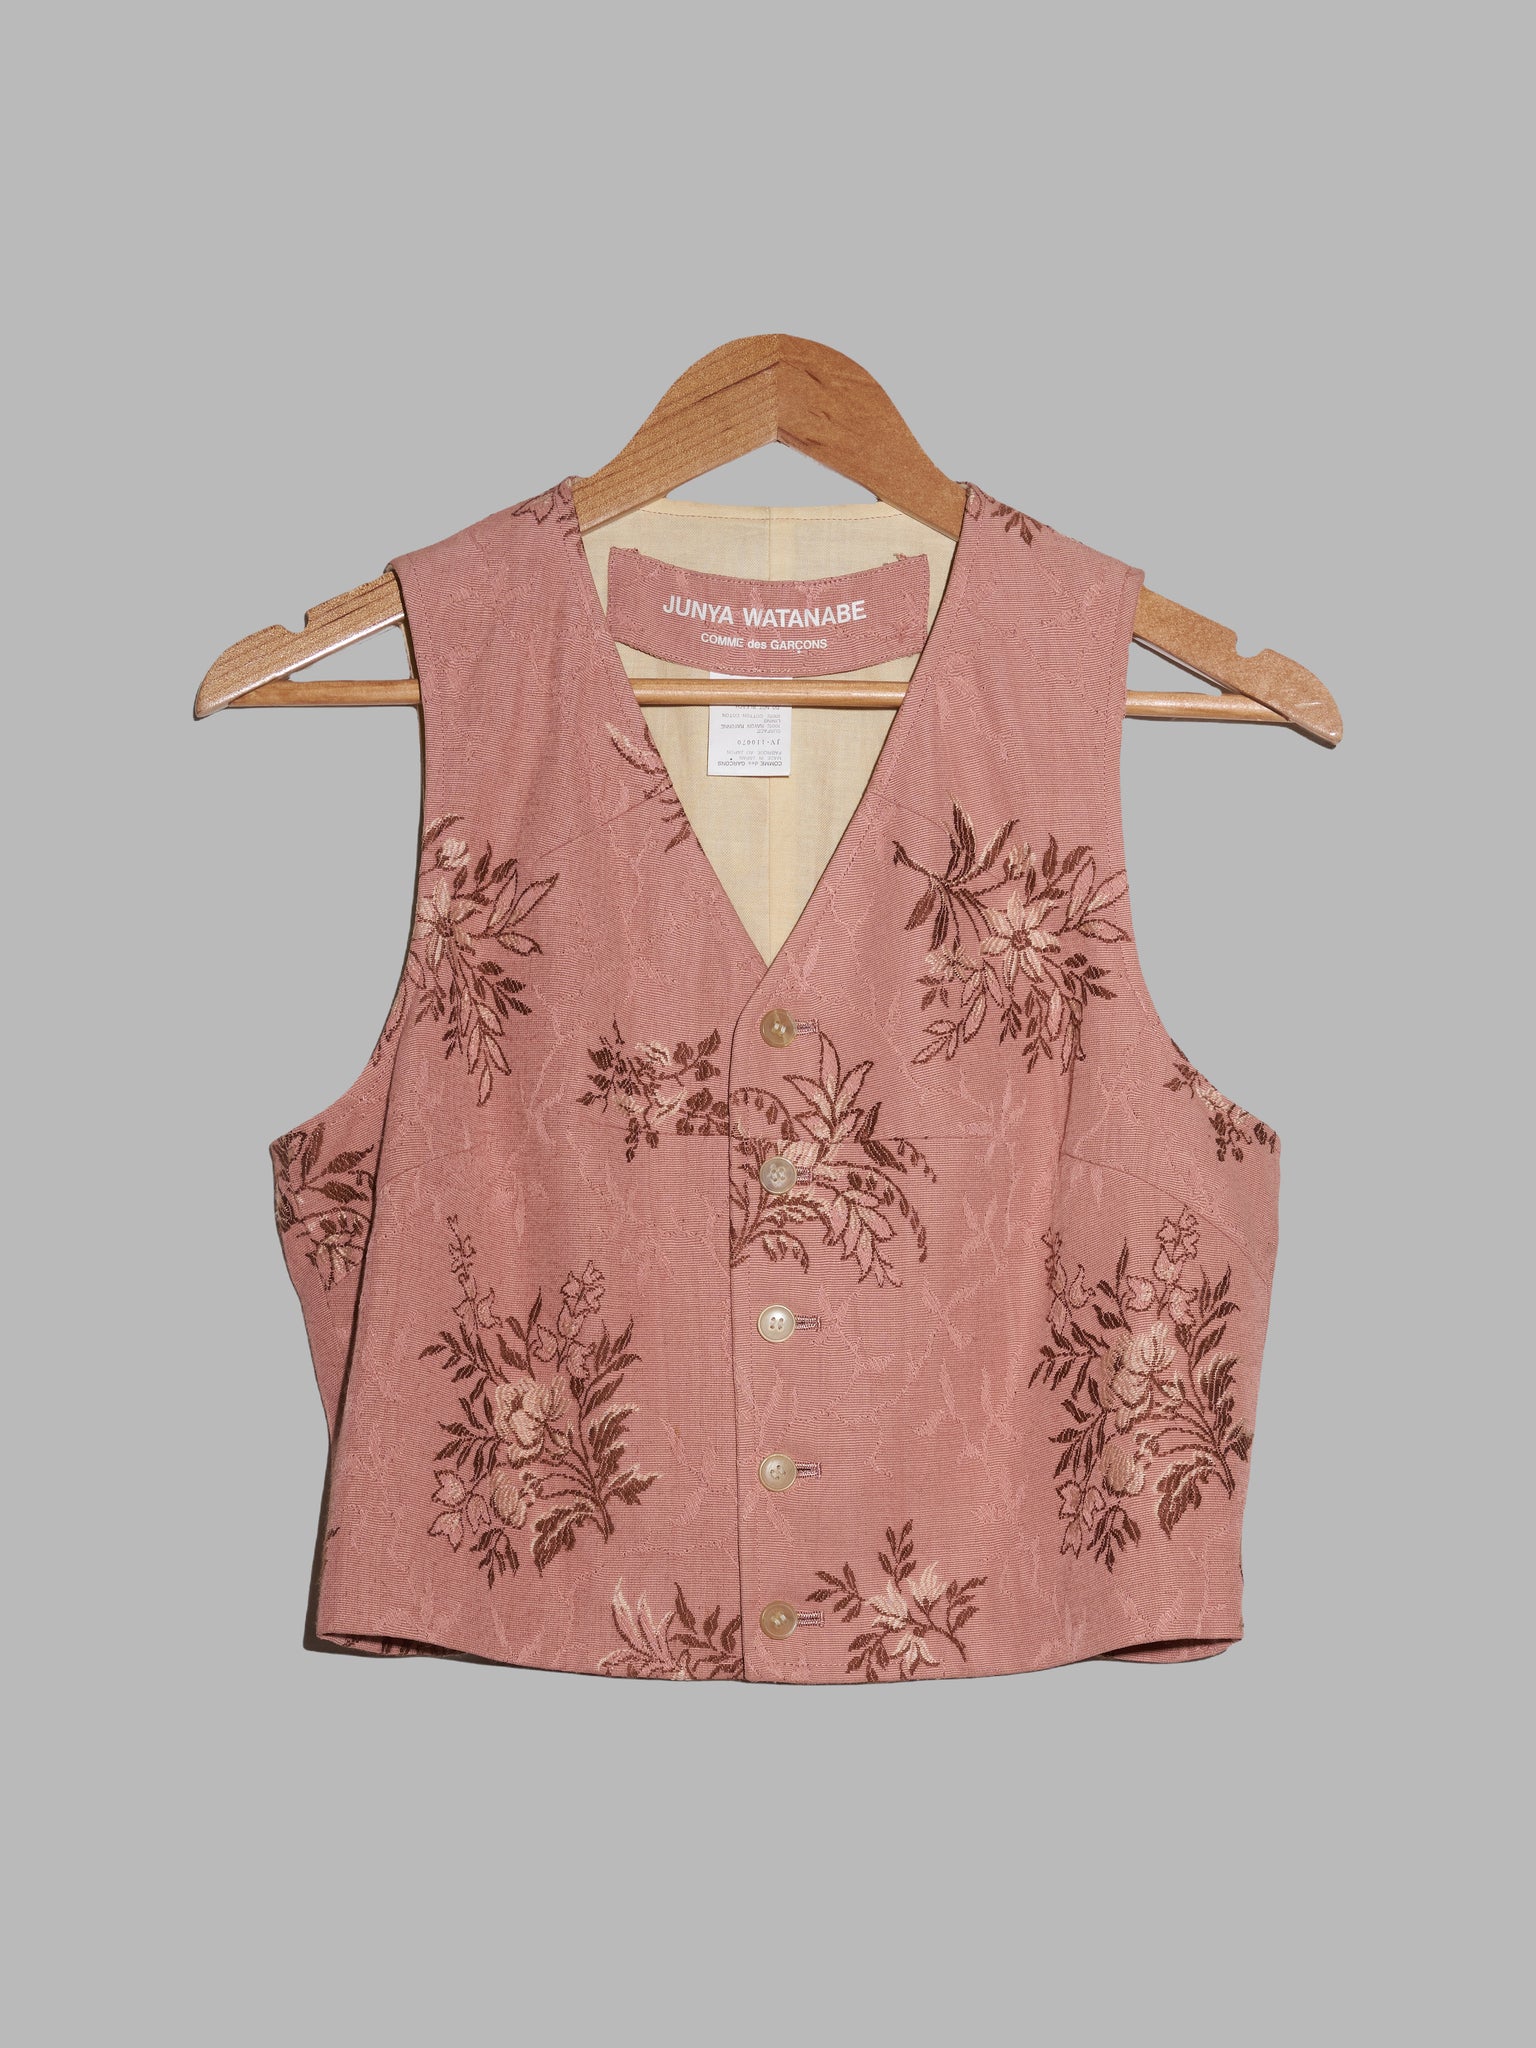 Junya Watanabe Comme des Garcons SS1993 dusty pink rayon floral jacquard vest